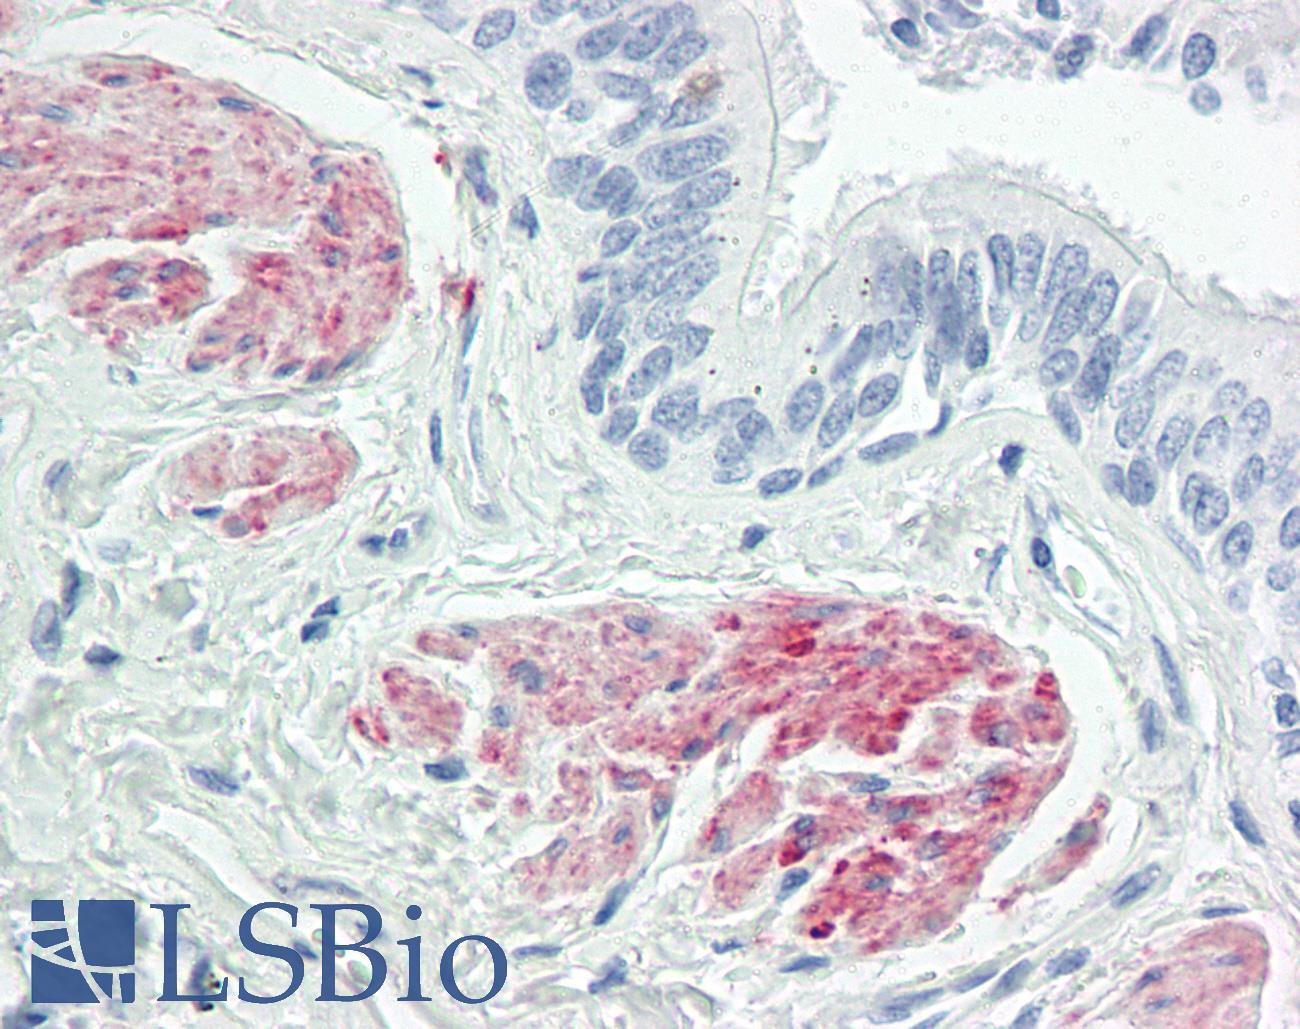 ZC3H8 Antibody - Anti-ZC3H8 antibody IHC of human lung, smooth muscle. Immunohistochemistry of formalin-fixed, paraffin-embedded tissue after heat-induced antigen retrieval. Antibody dilution 5 ug/ml.